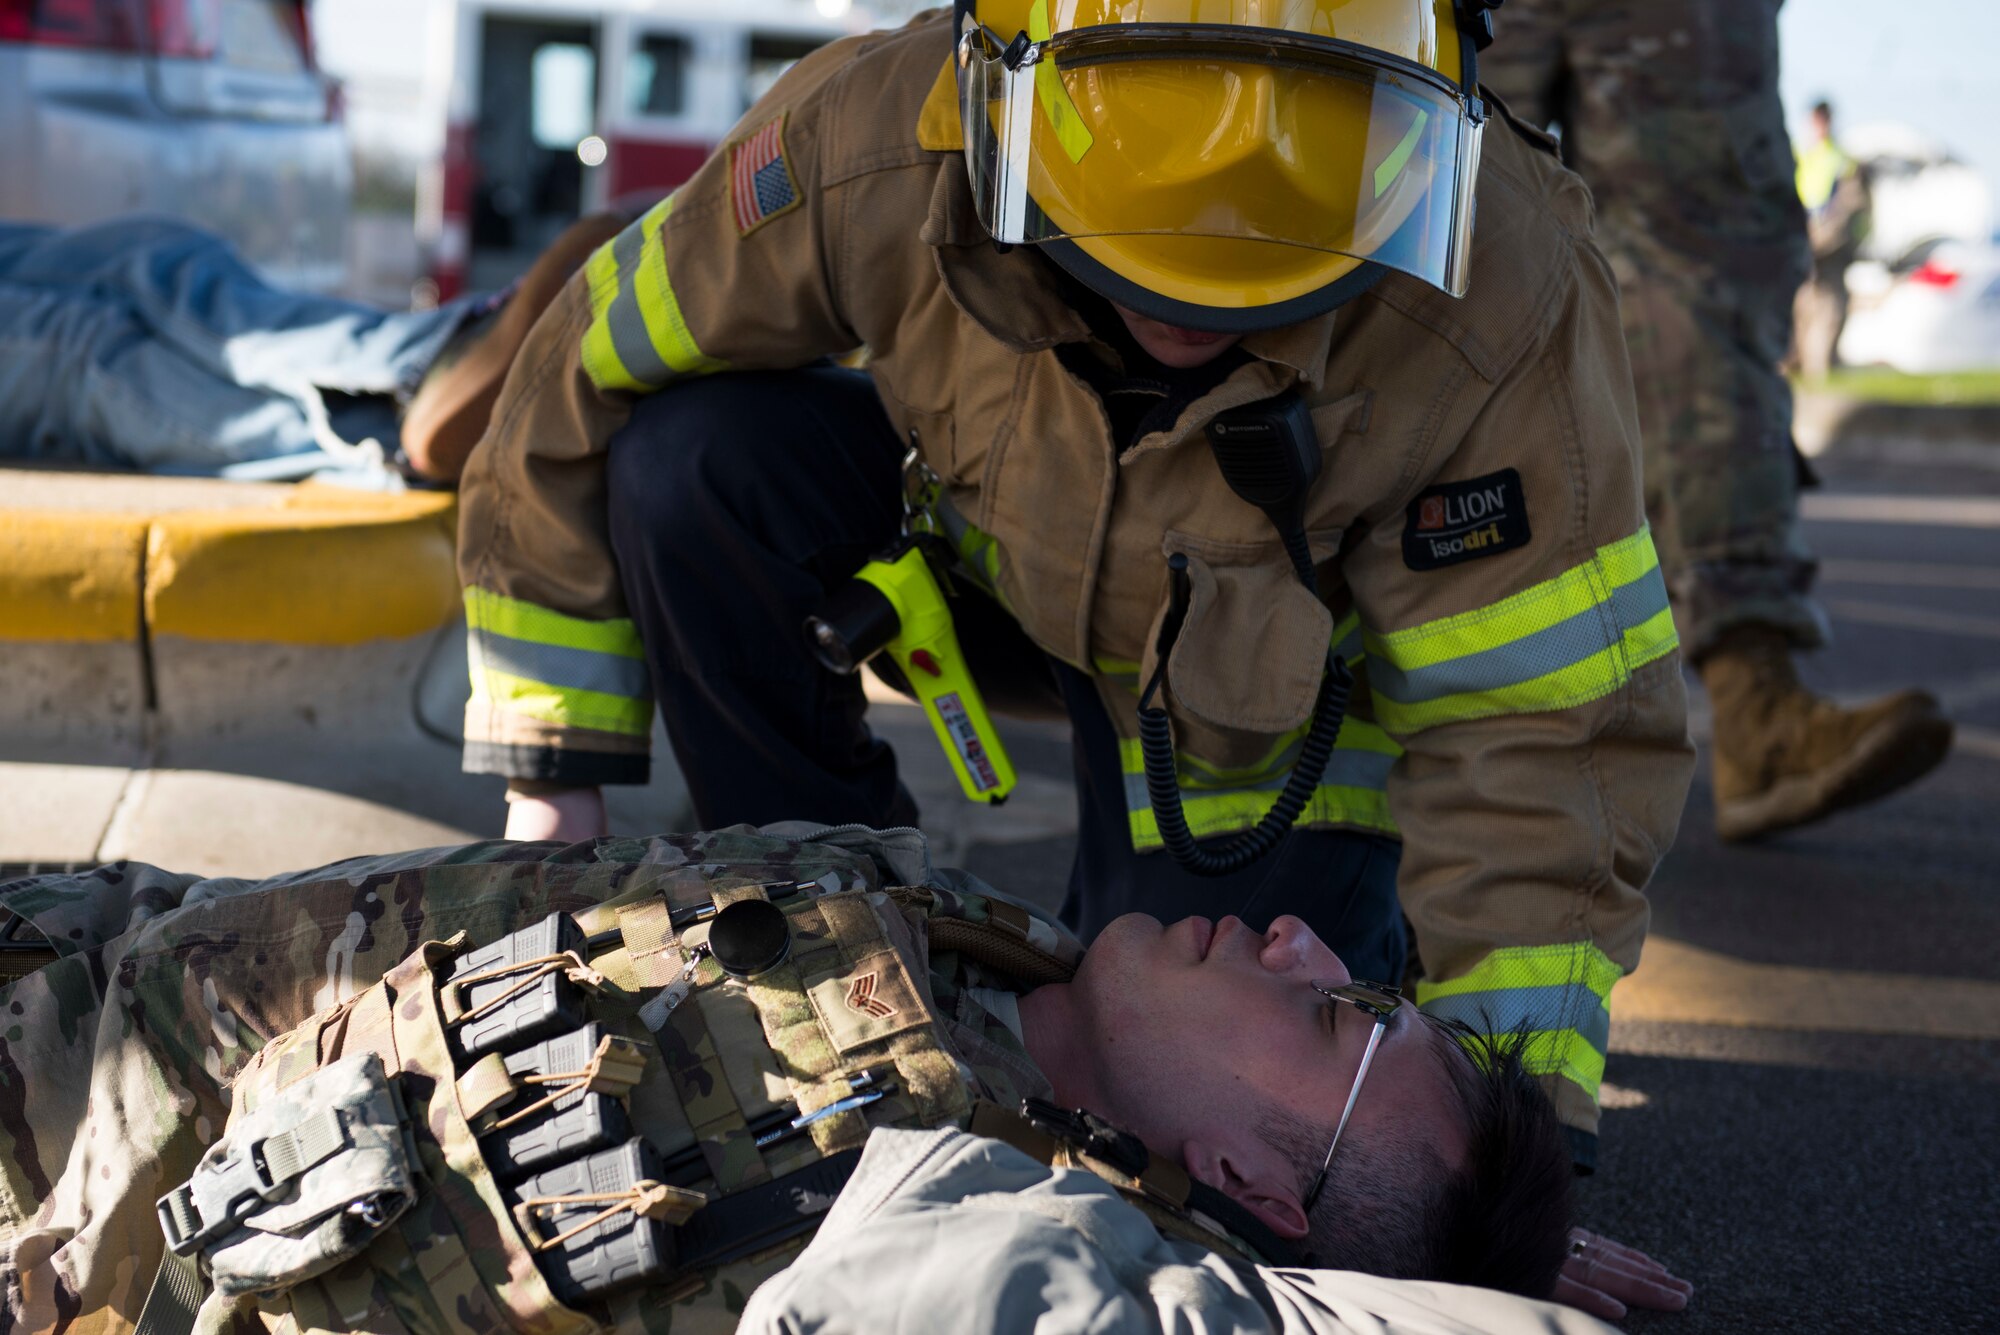 Greg Metheringham, 422nd Civil Engineer Squadron firefighter, assists a simulated casualty during the 501st Combat Support Wing Readiness Exercise 20-01 at RAF Croughton, England, Feb. 12, 2020. The exercise tested the wing’s preparedness and response capabilities to an emergency situation. (U.S. Air Force photo by Airman 1st Class Jennifer Zima)